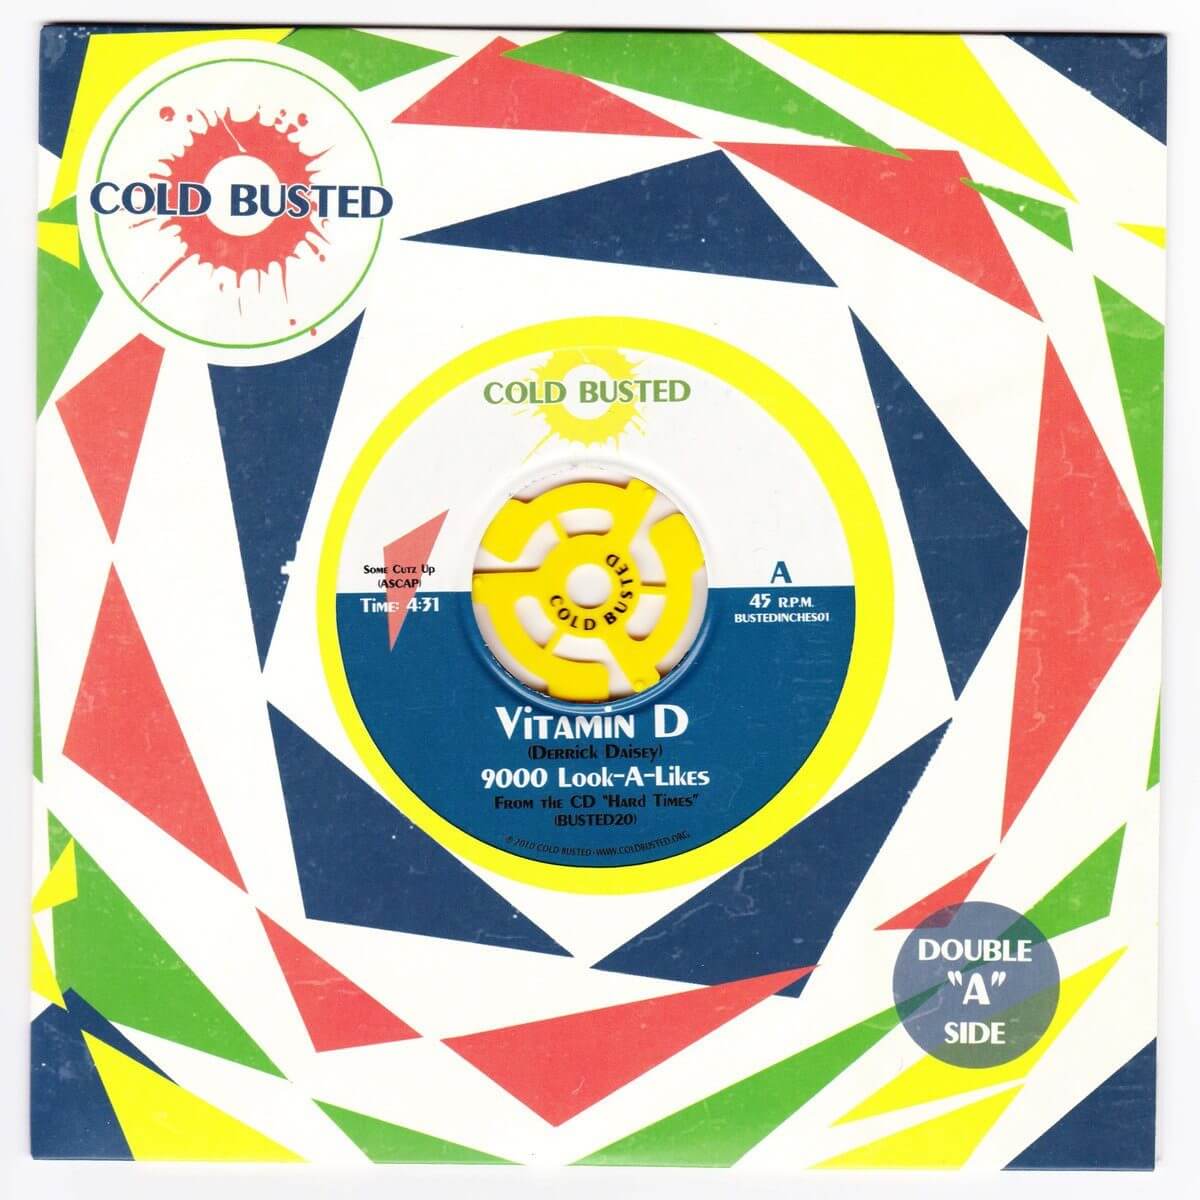 Vitamin D - 9000 Look-A-Likes - Limited Edition 7 Inch Vinyl - Cold Busted